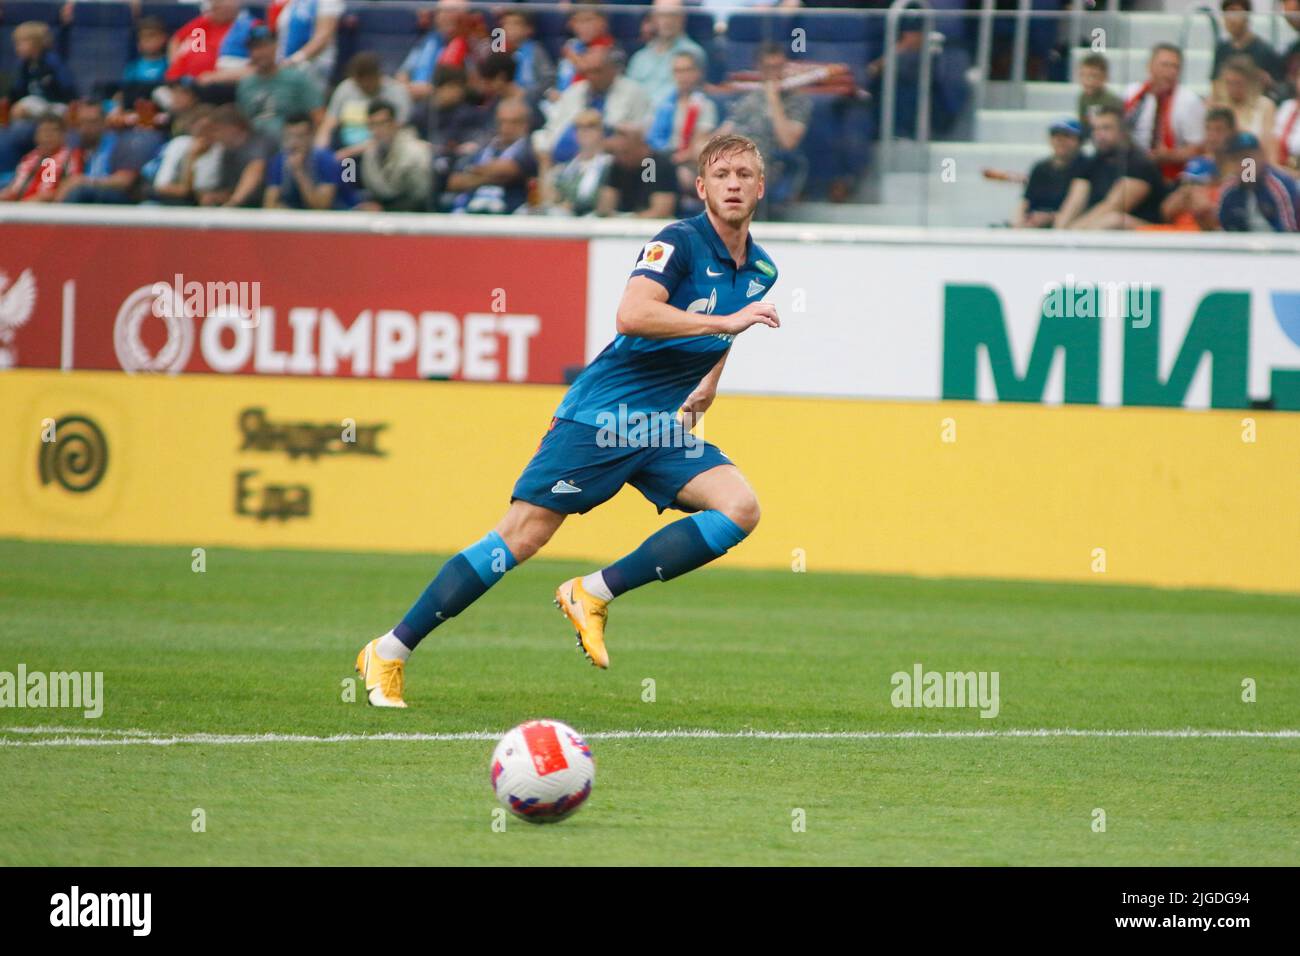 Saint Petersburg, Russia. 09th July, 2022. Dmitri Chistyakov (No.2) of Zenit seen during the Olimpbet Russian Football Super Cup football match between Zenit Saint Petersburg and Spartak Moscow at Gazprom Arena. Final score; Zenit 4:0 Spartak. Credit: SOPA Images Limited/Alamy Live News Stock Photo